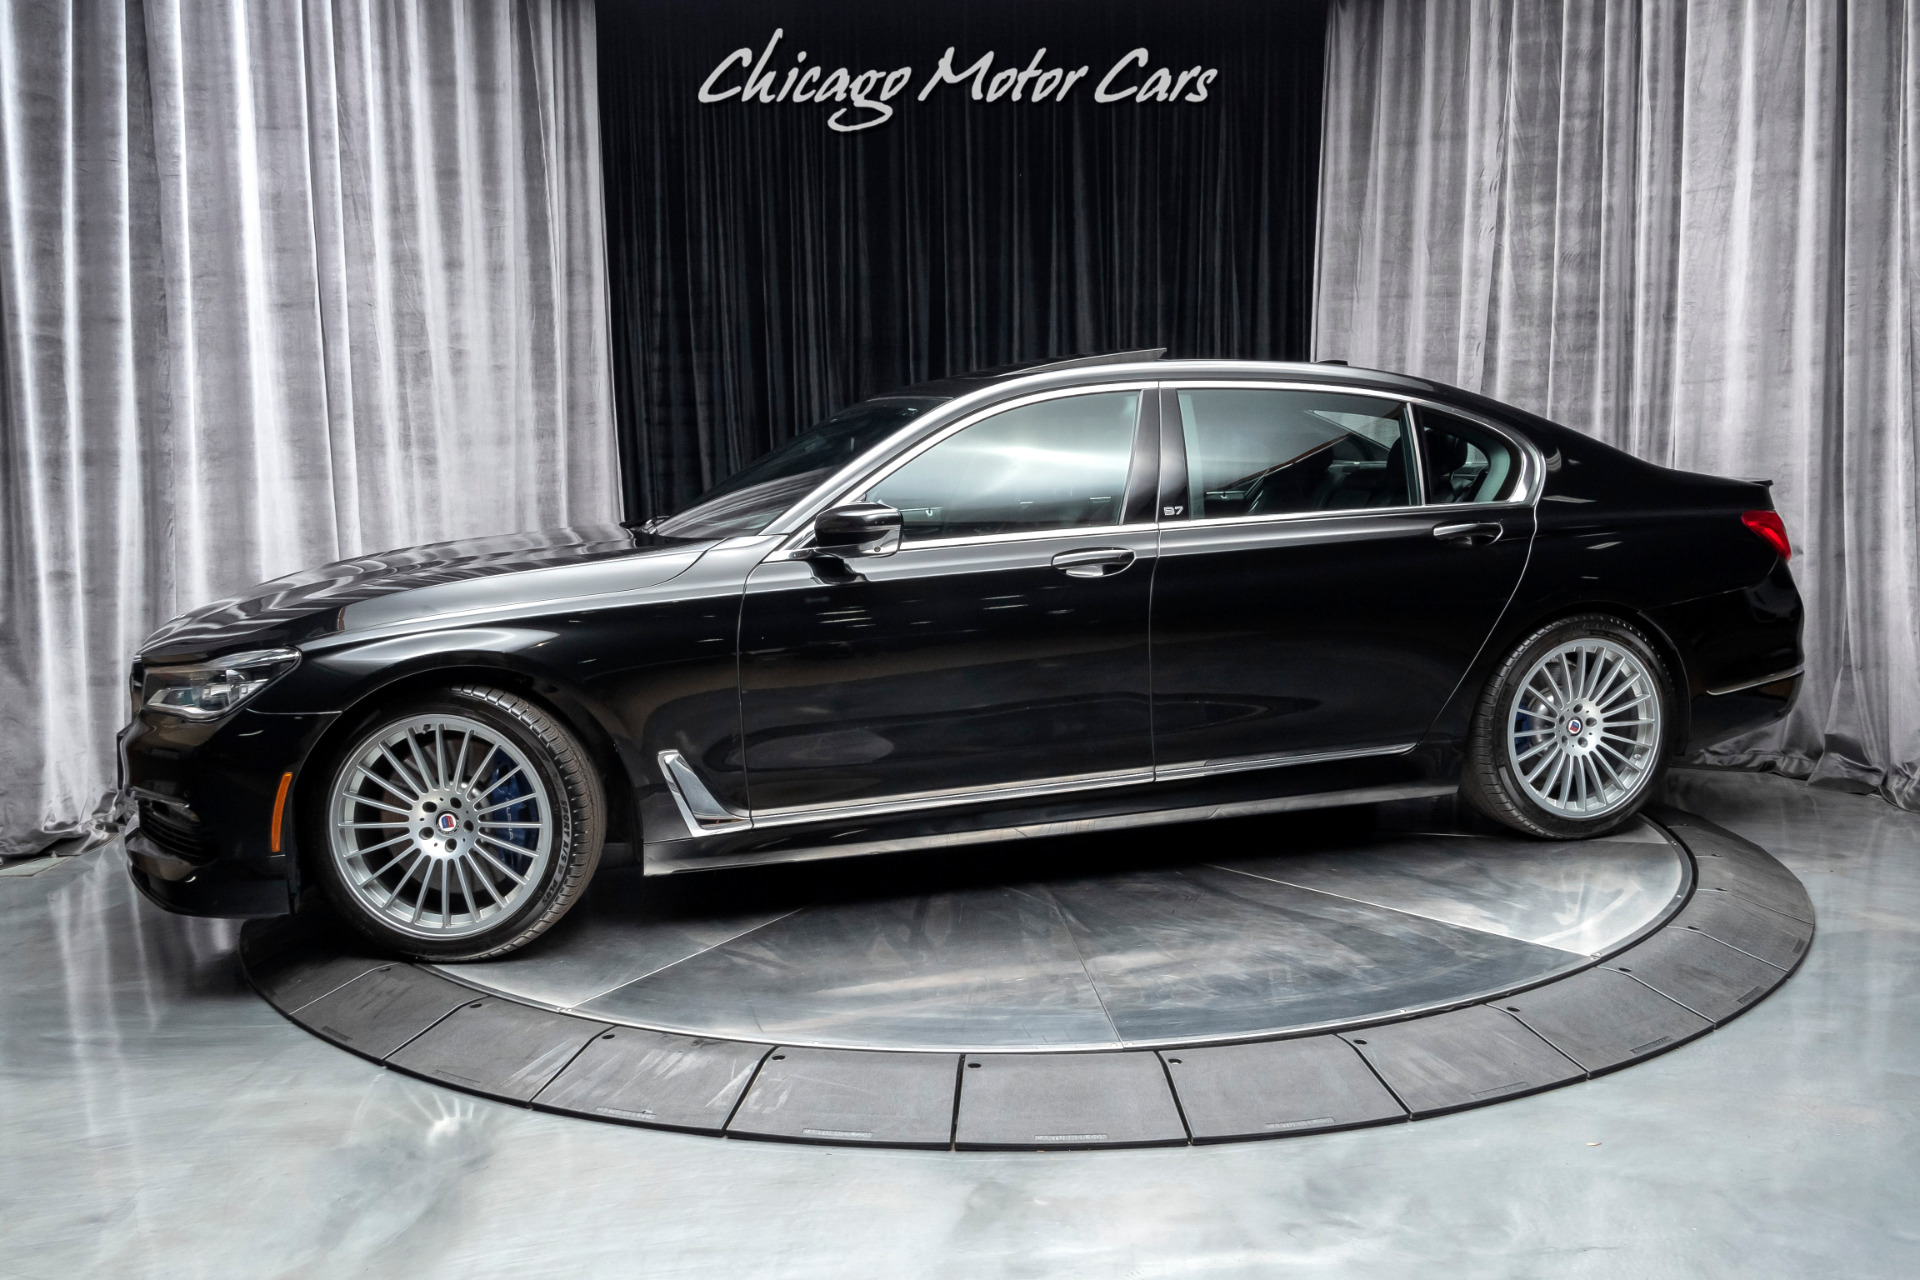 Used 2017 BMW Alpina B7 xDrive $151k+MSRP! Luxury Rear Seating Pkg! For  Sale (Special Pricing) | Chicago Motor Cars Stock #17293